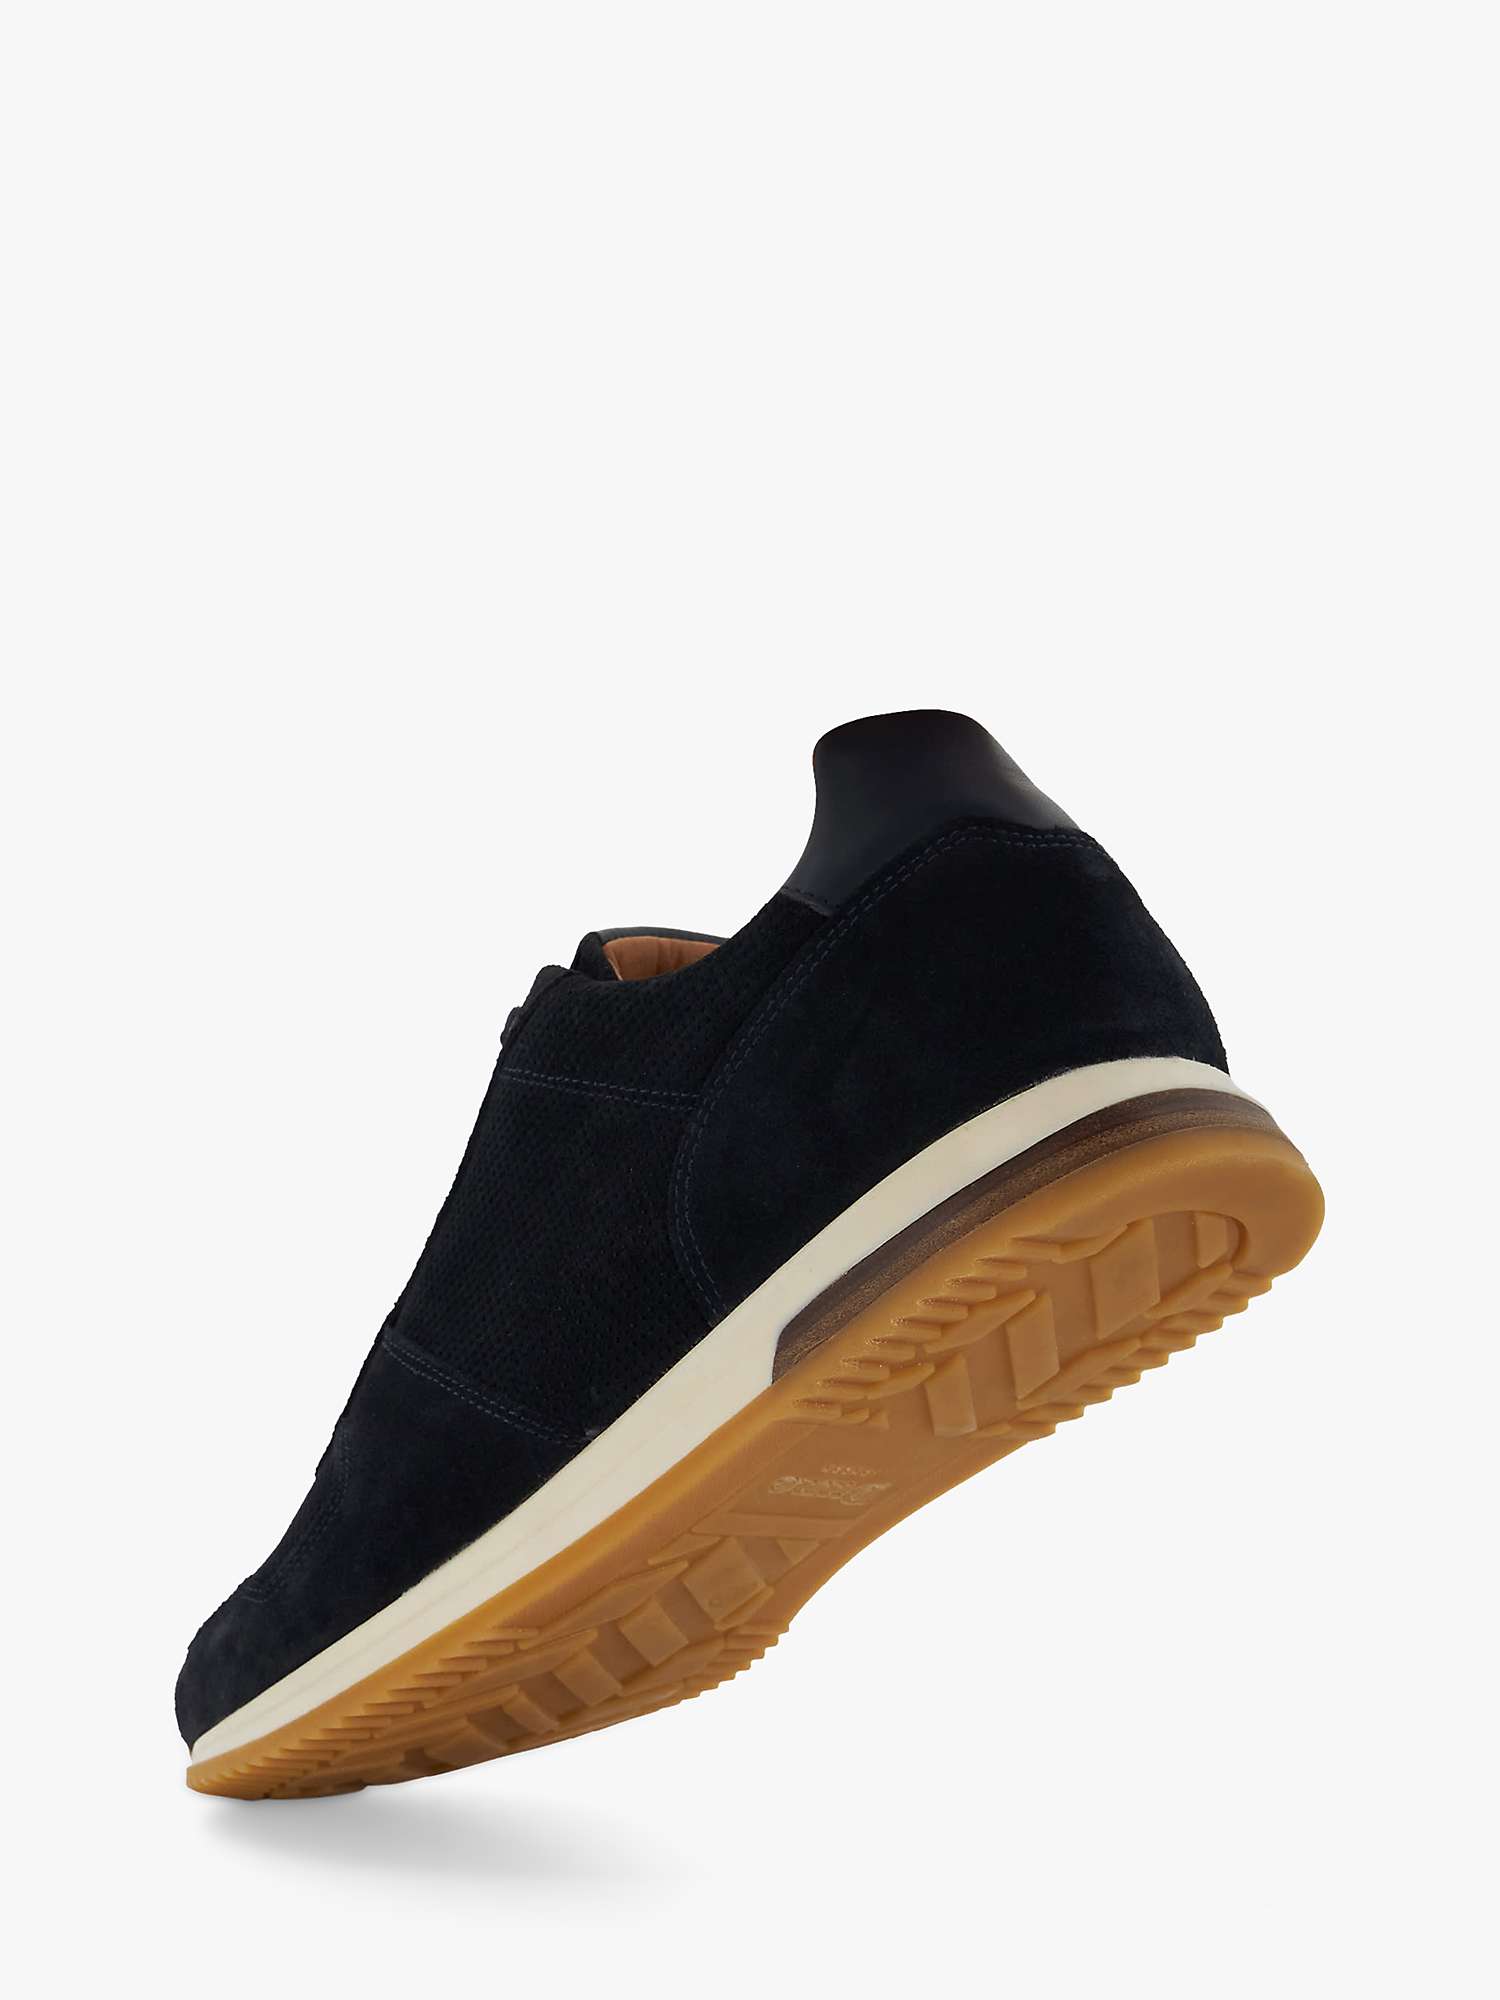 Buy Dune Trilogy Suede Runner Trainers Online at johnlewis.com